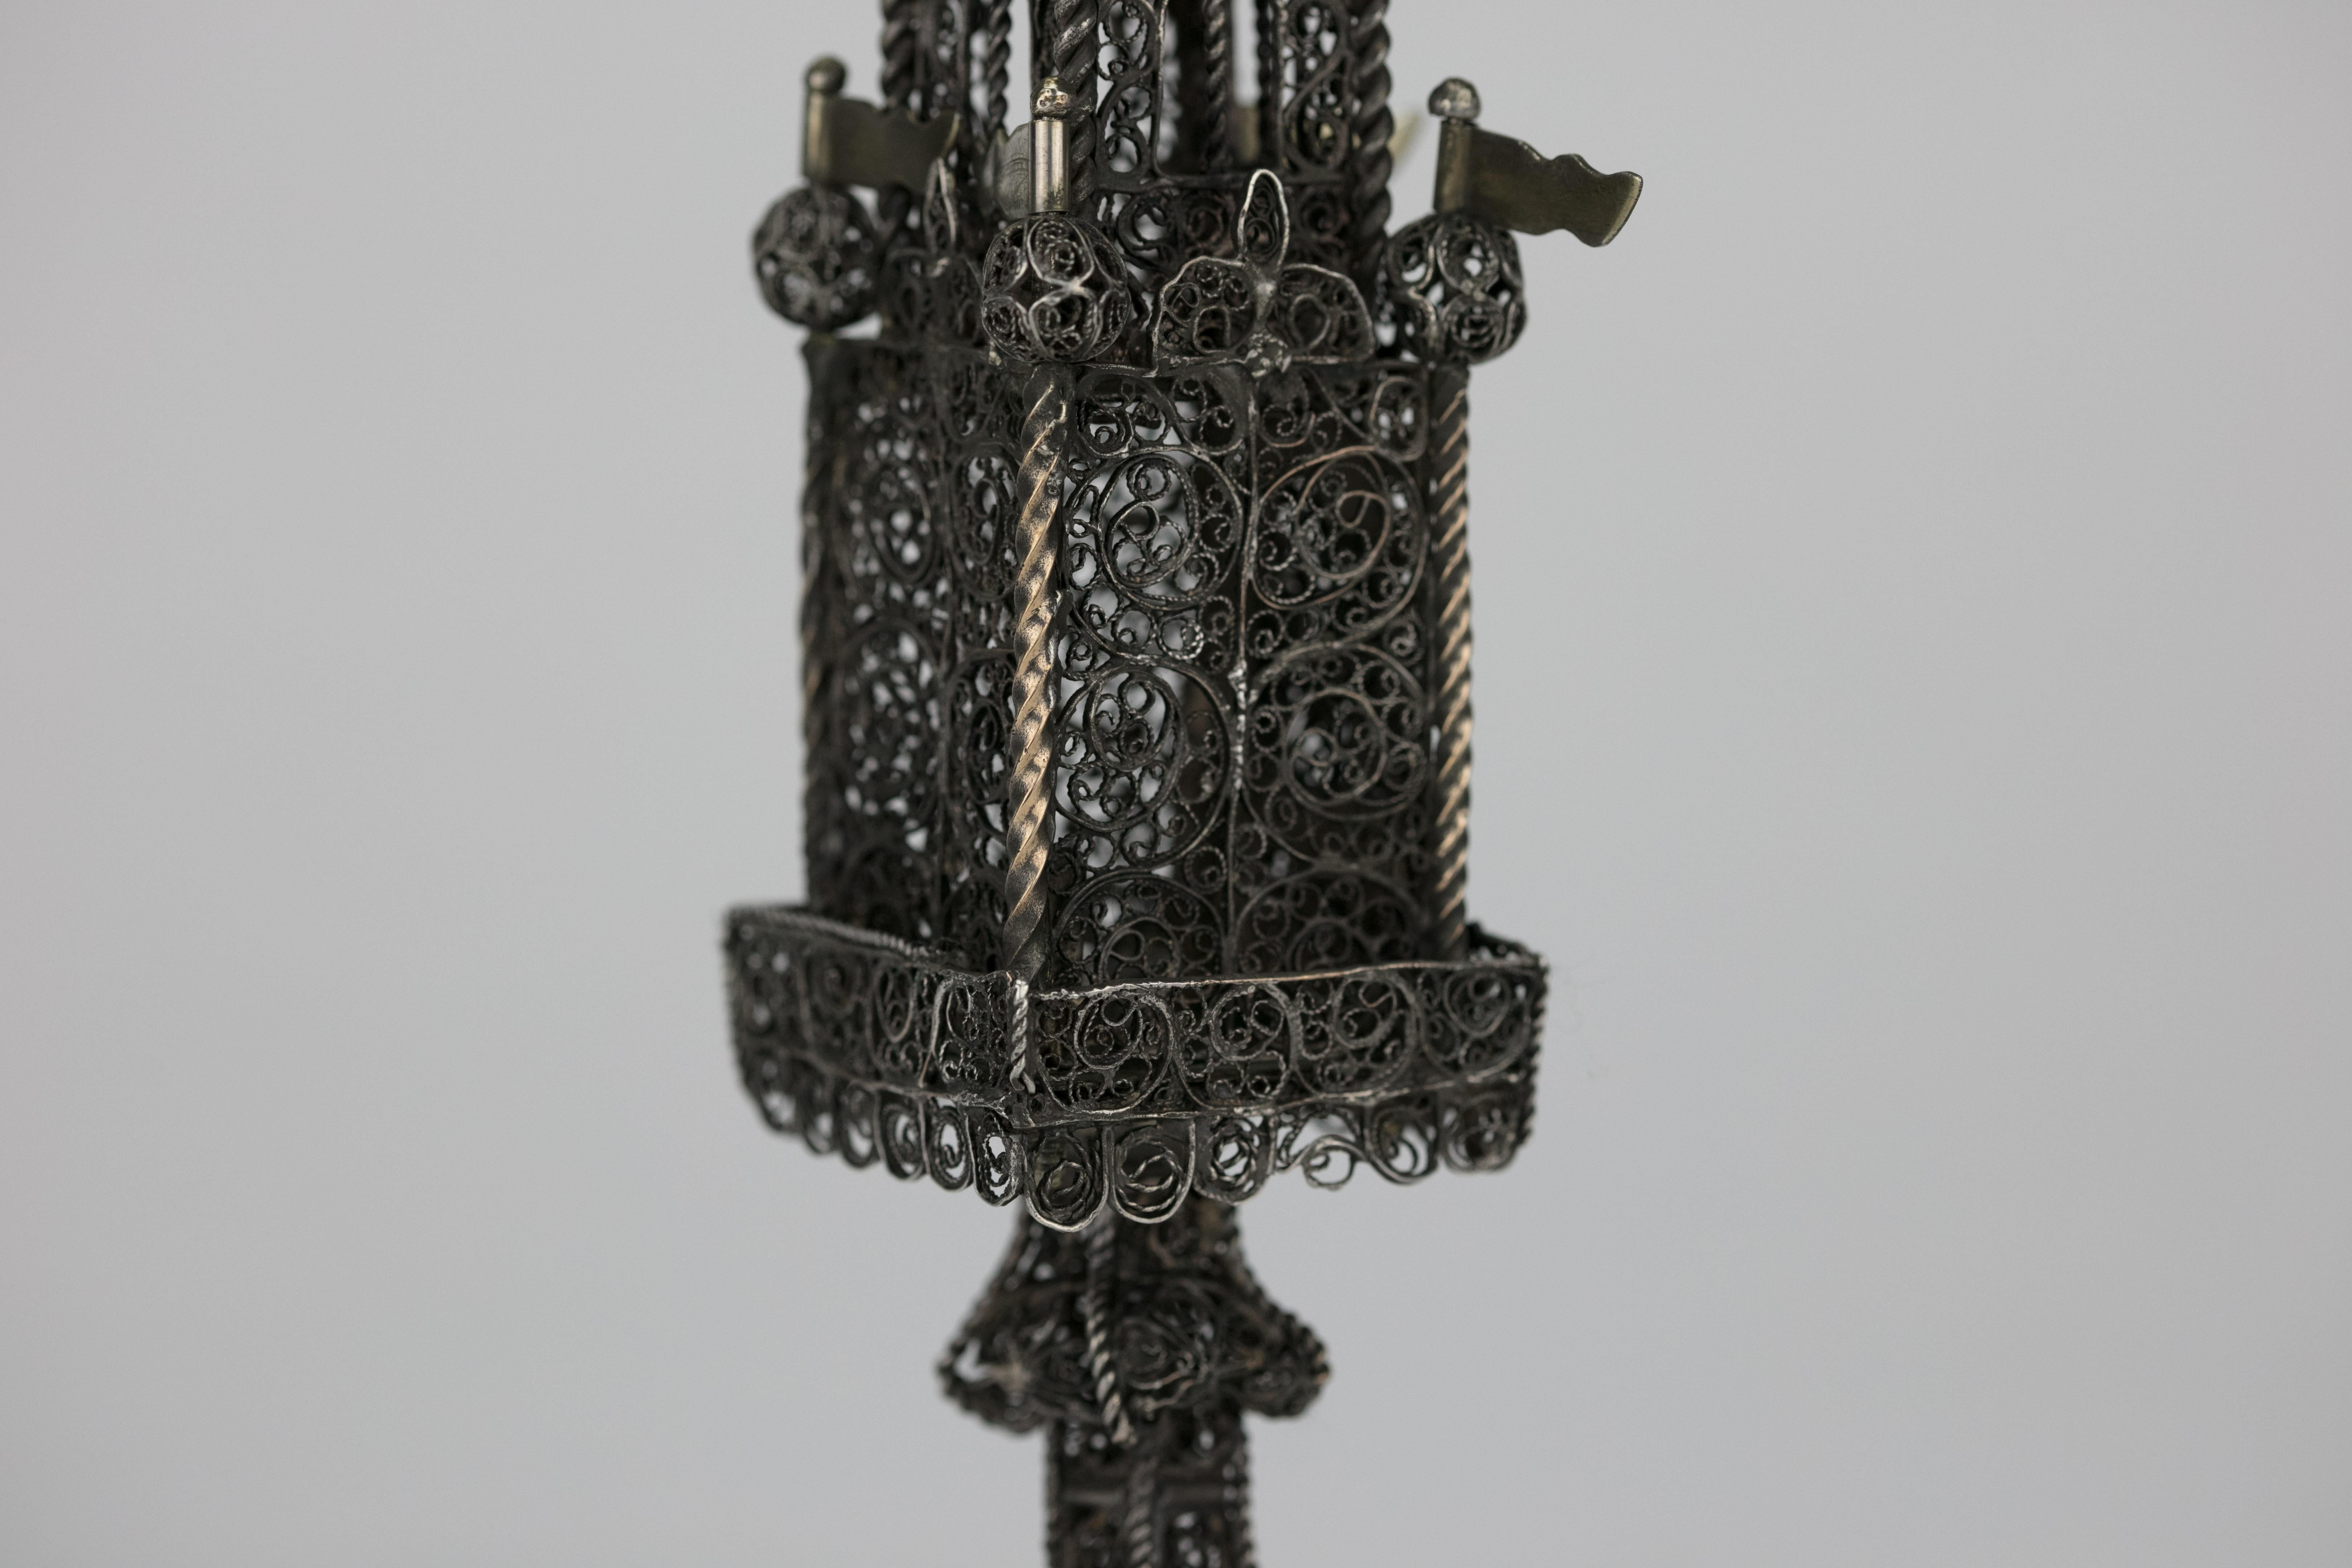 Hand-Crafted Late 18th Century Ukrainian Silver Spice Tower